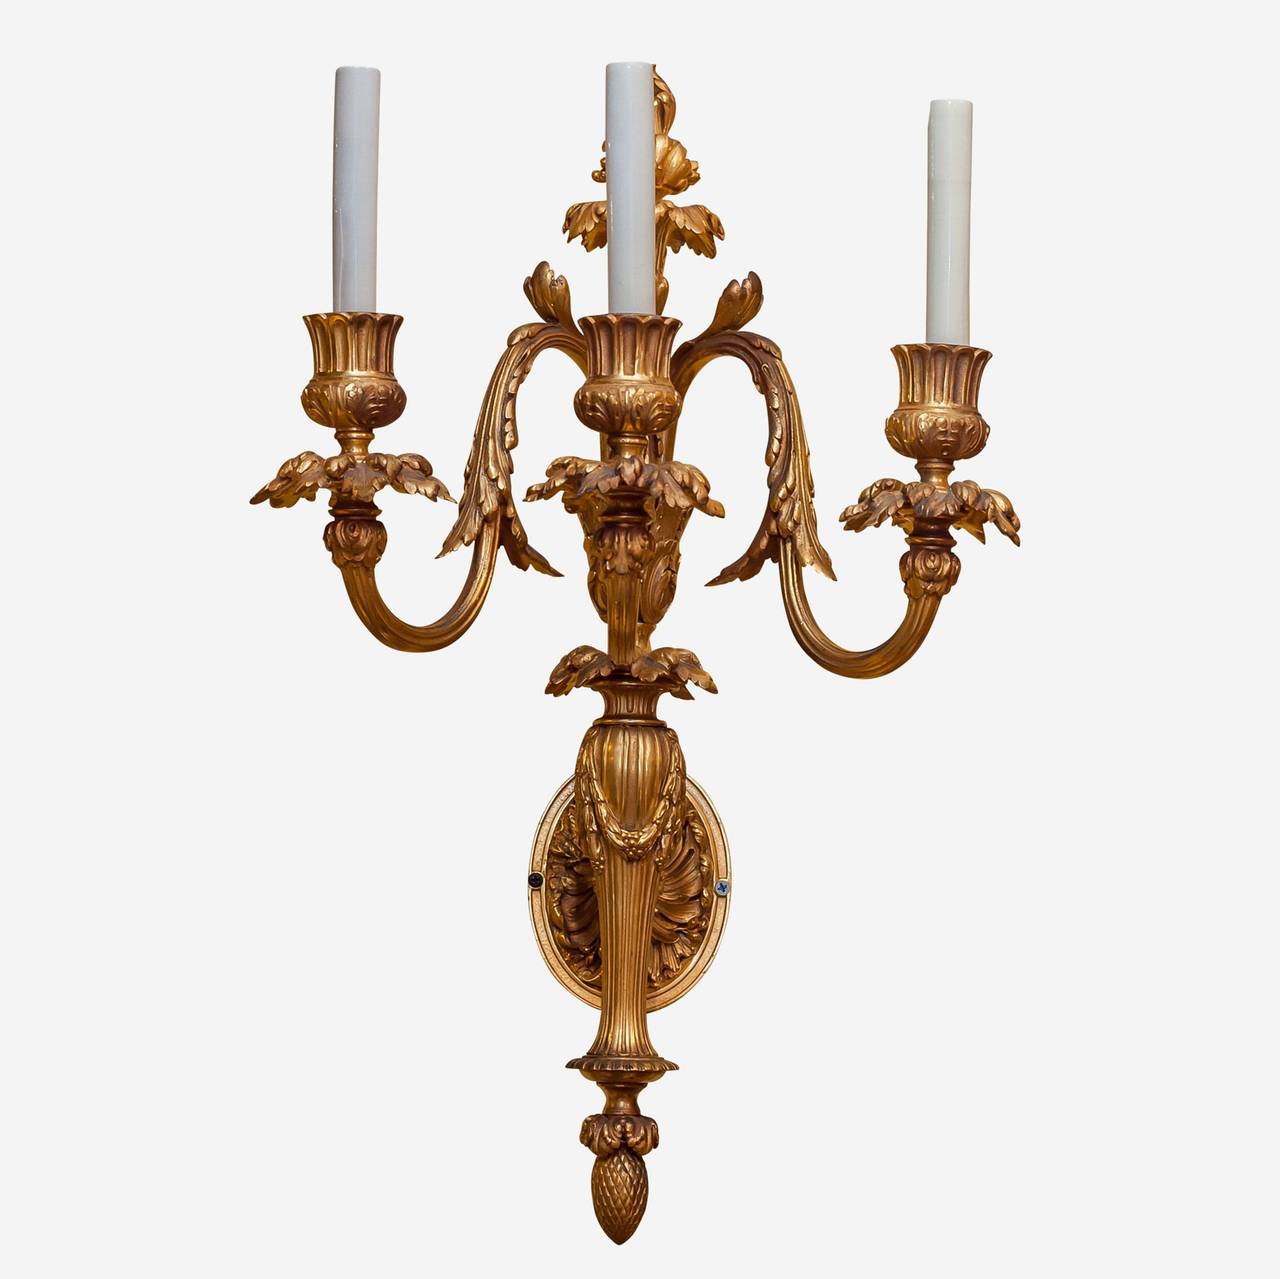 Exquisite set of four gilt bronze three-arm Louis XVI style wall lights.
Stock number: L208.